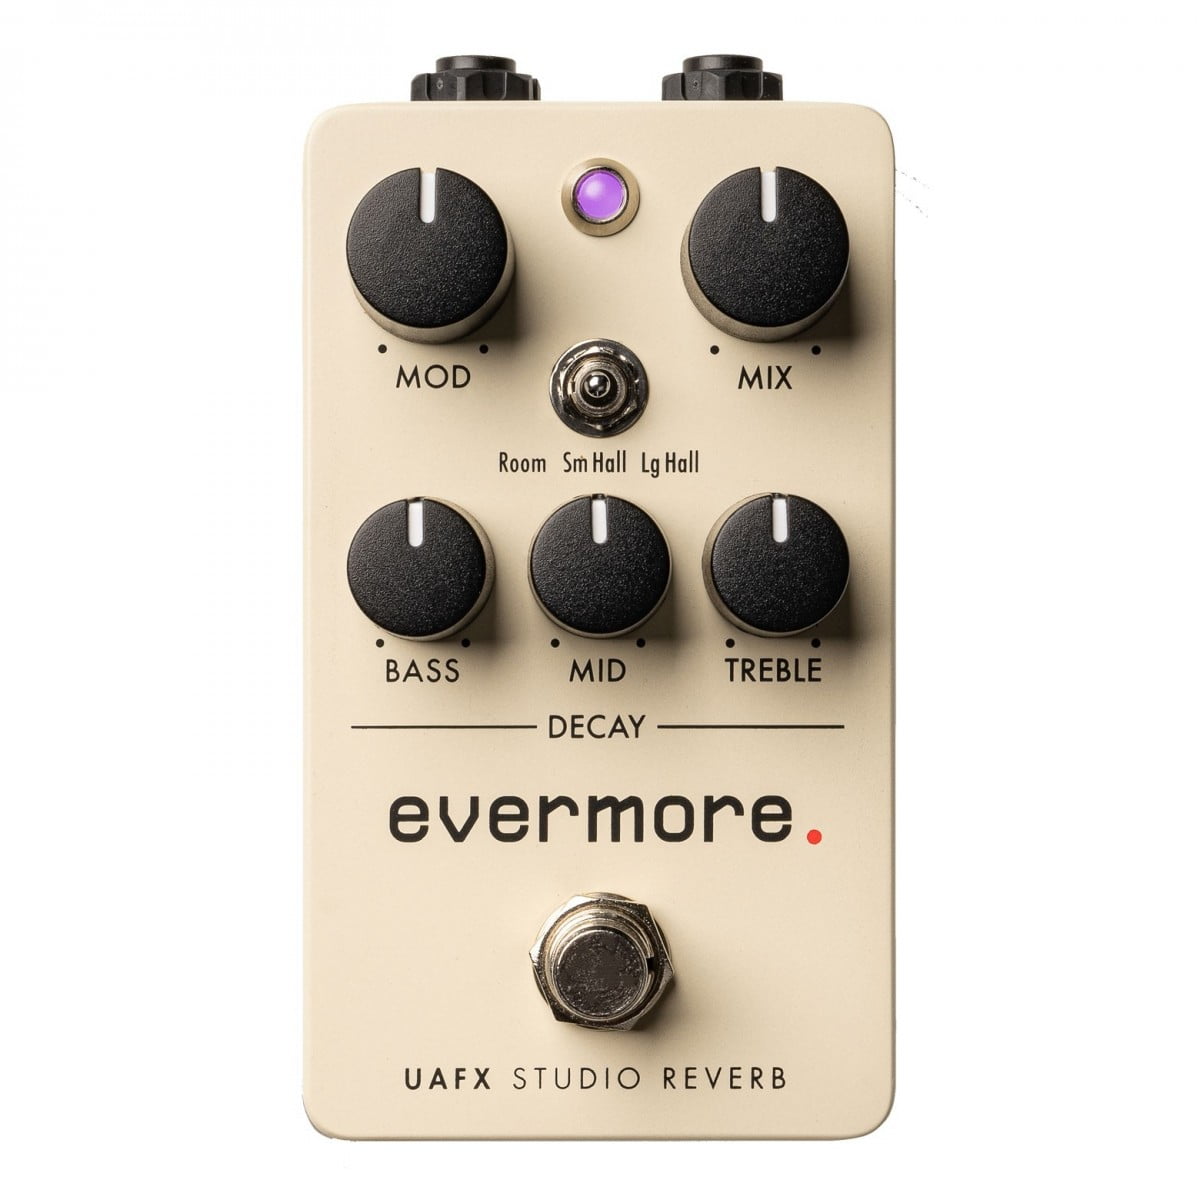 Universal Audio UAFX Evermore Studio Reverb Pedal - New Universal Audio          Analogue Reverb Delay       Guitar Effect Pedal